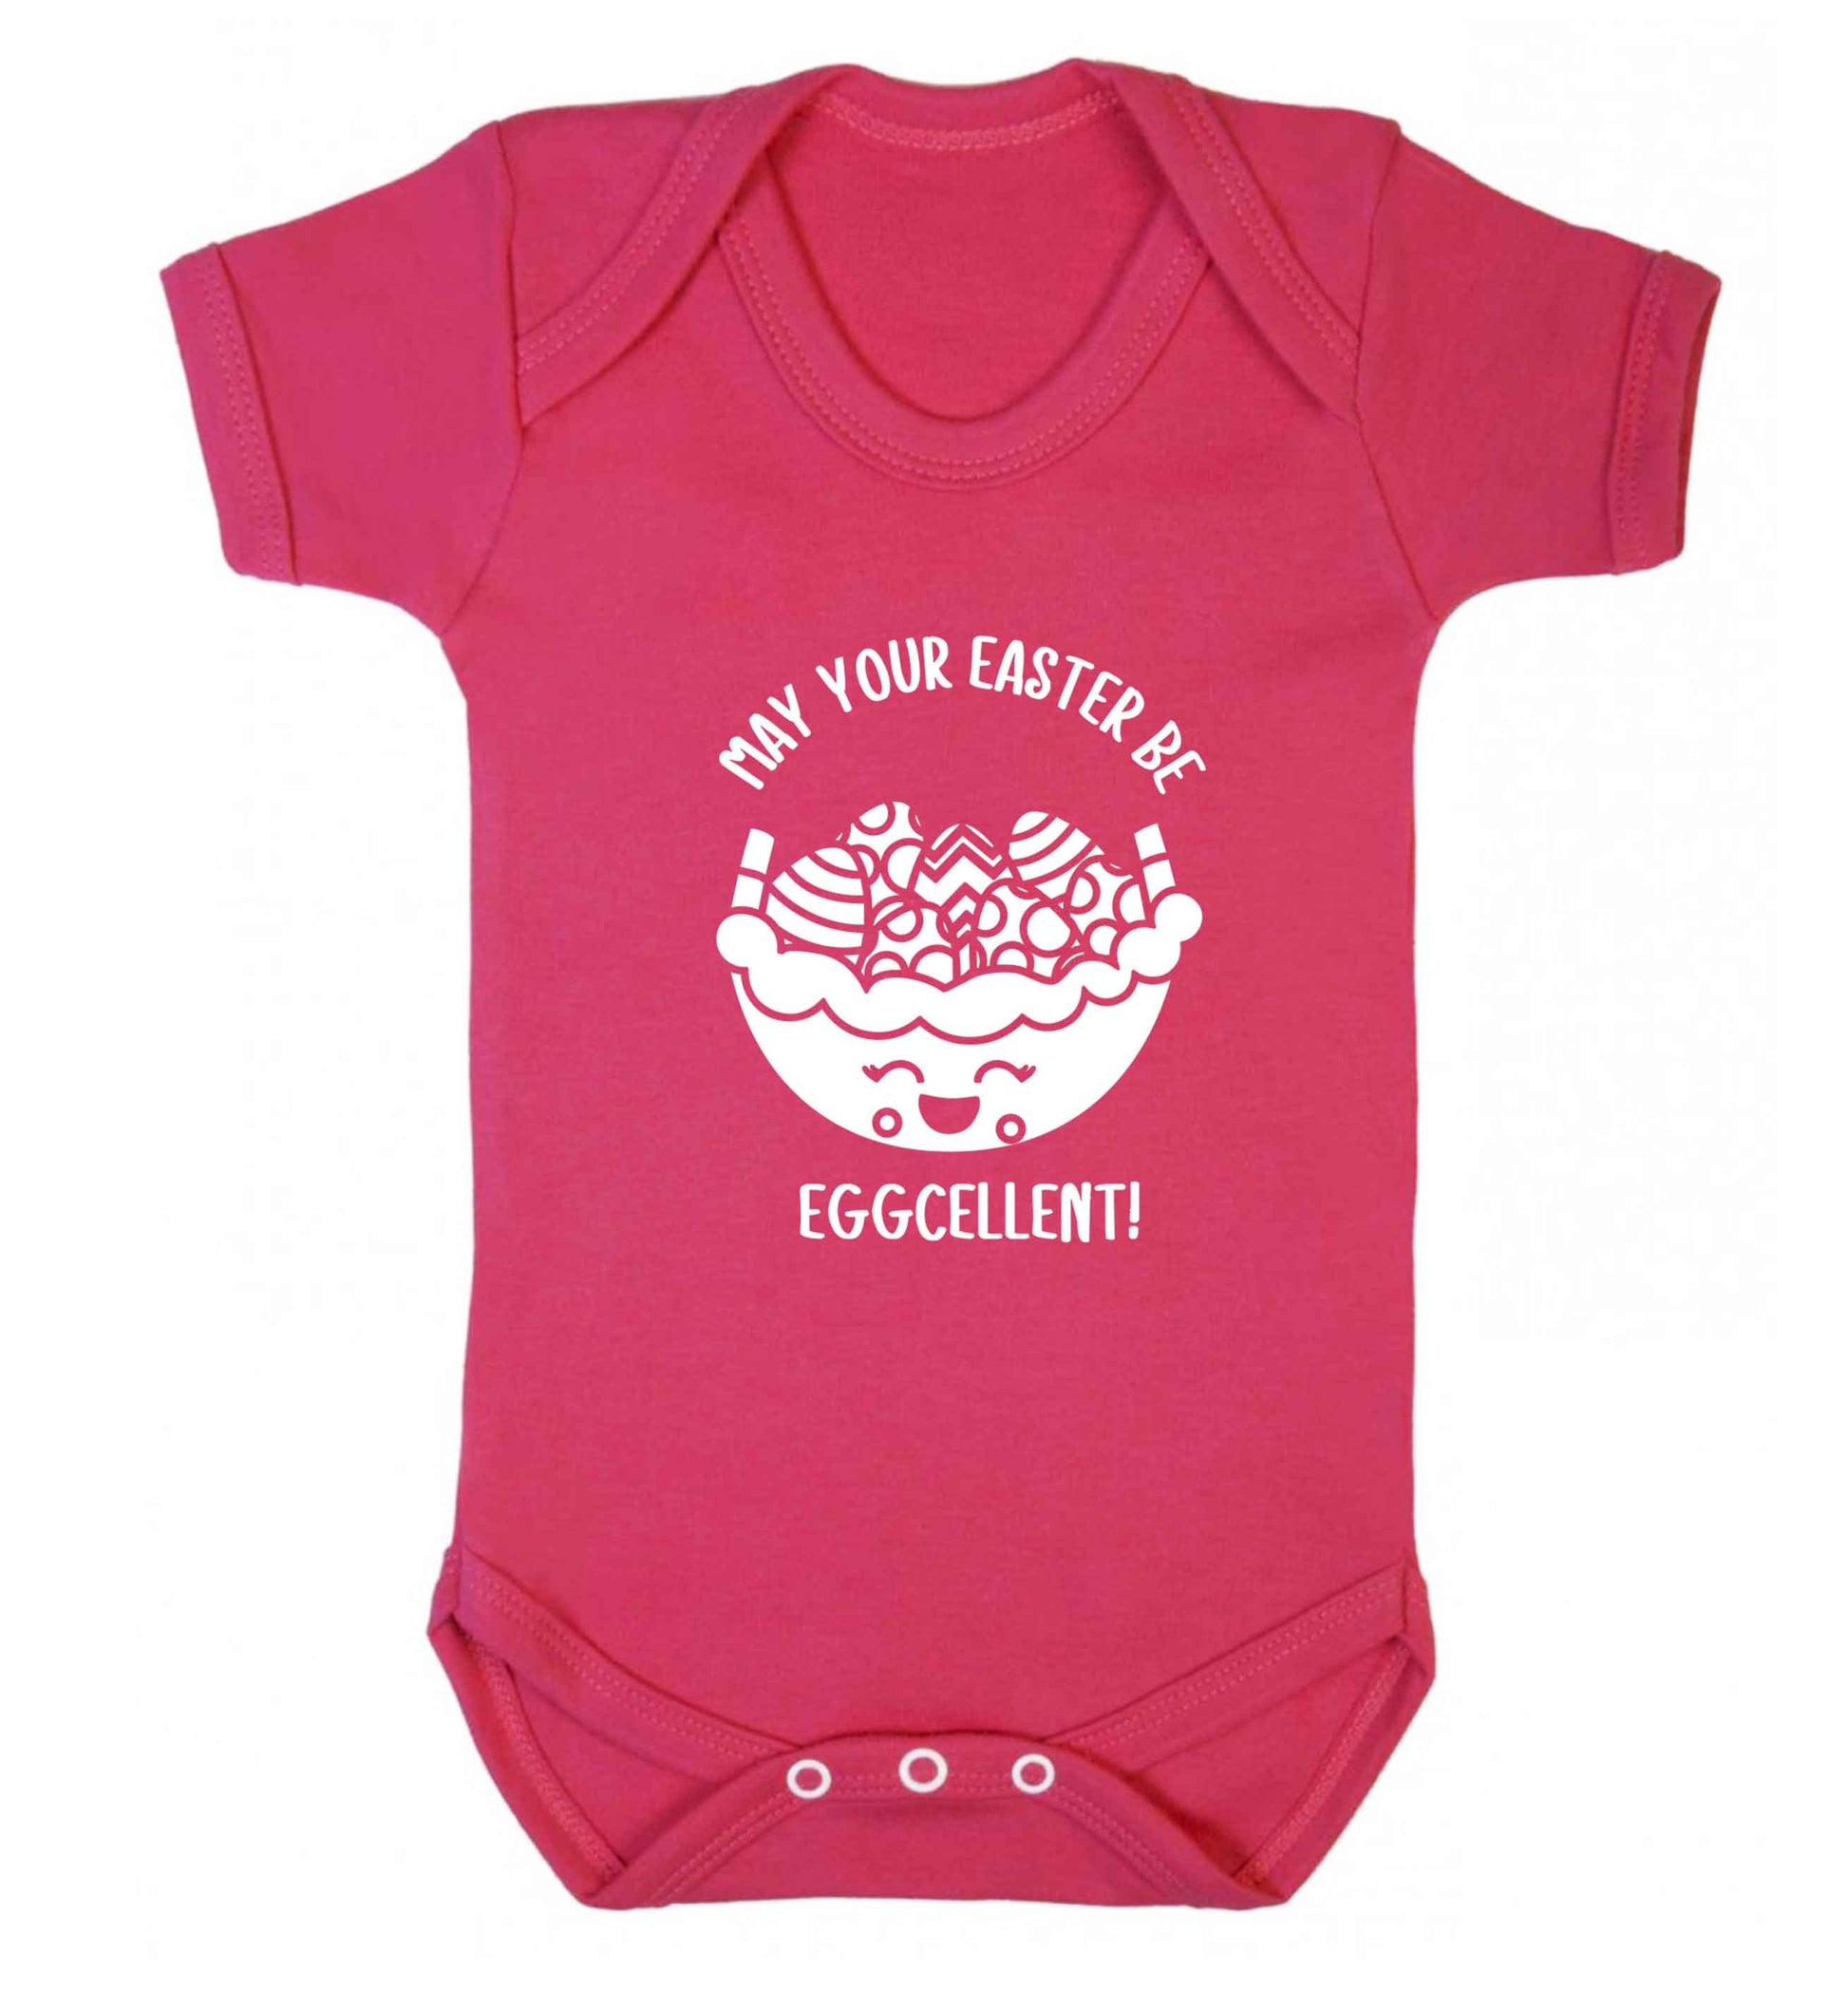 May your Easter be eggcellent baby vest dark pink 18-24 months